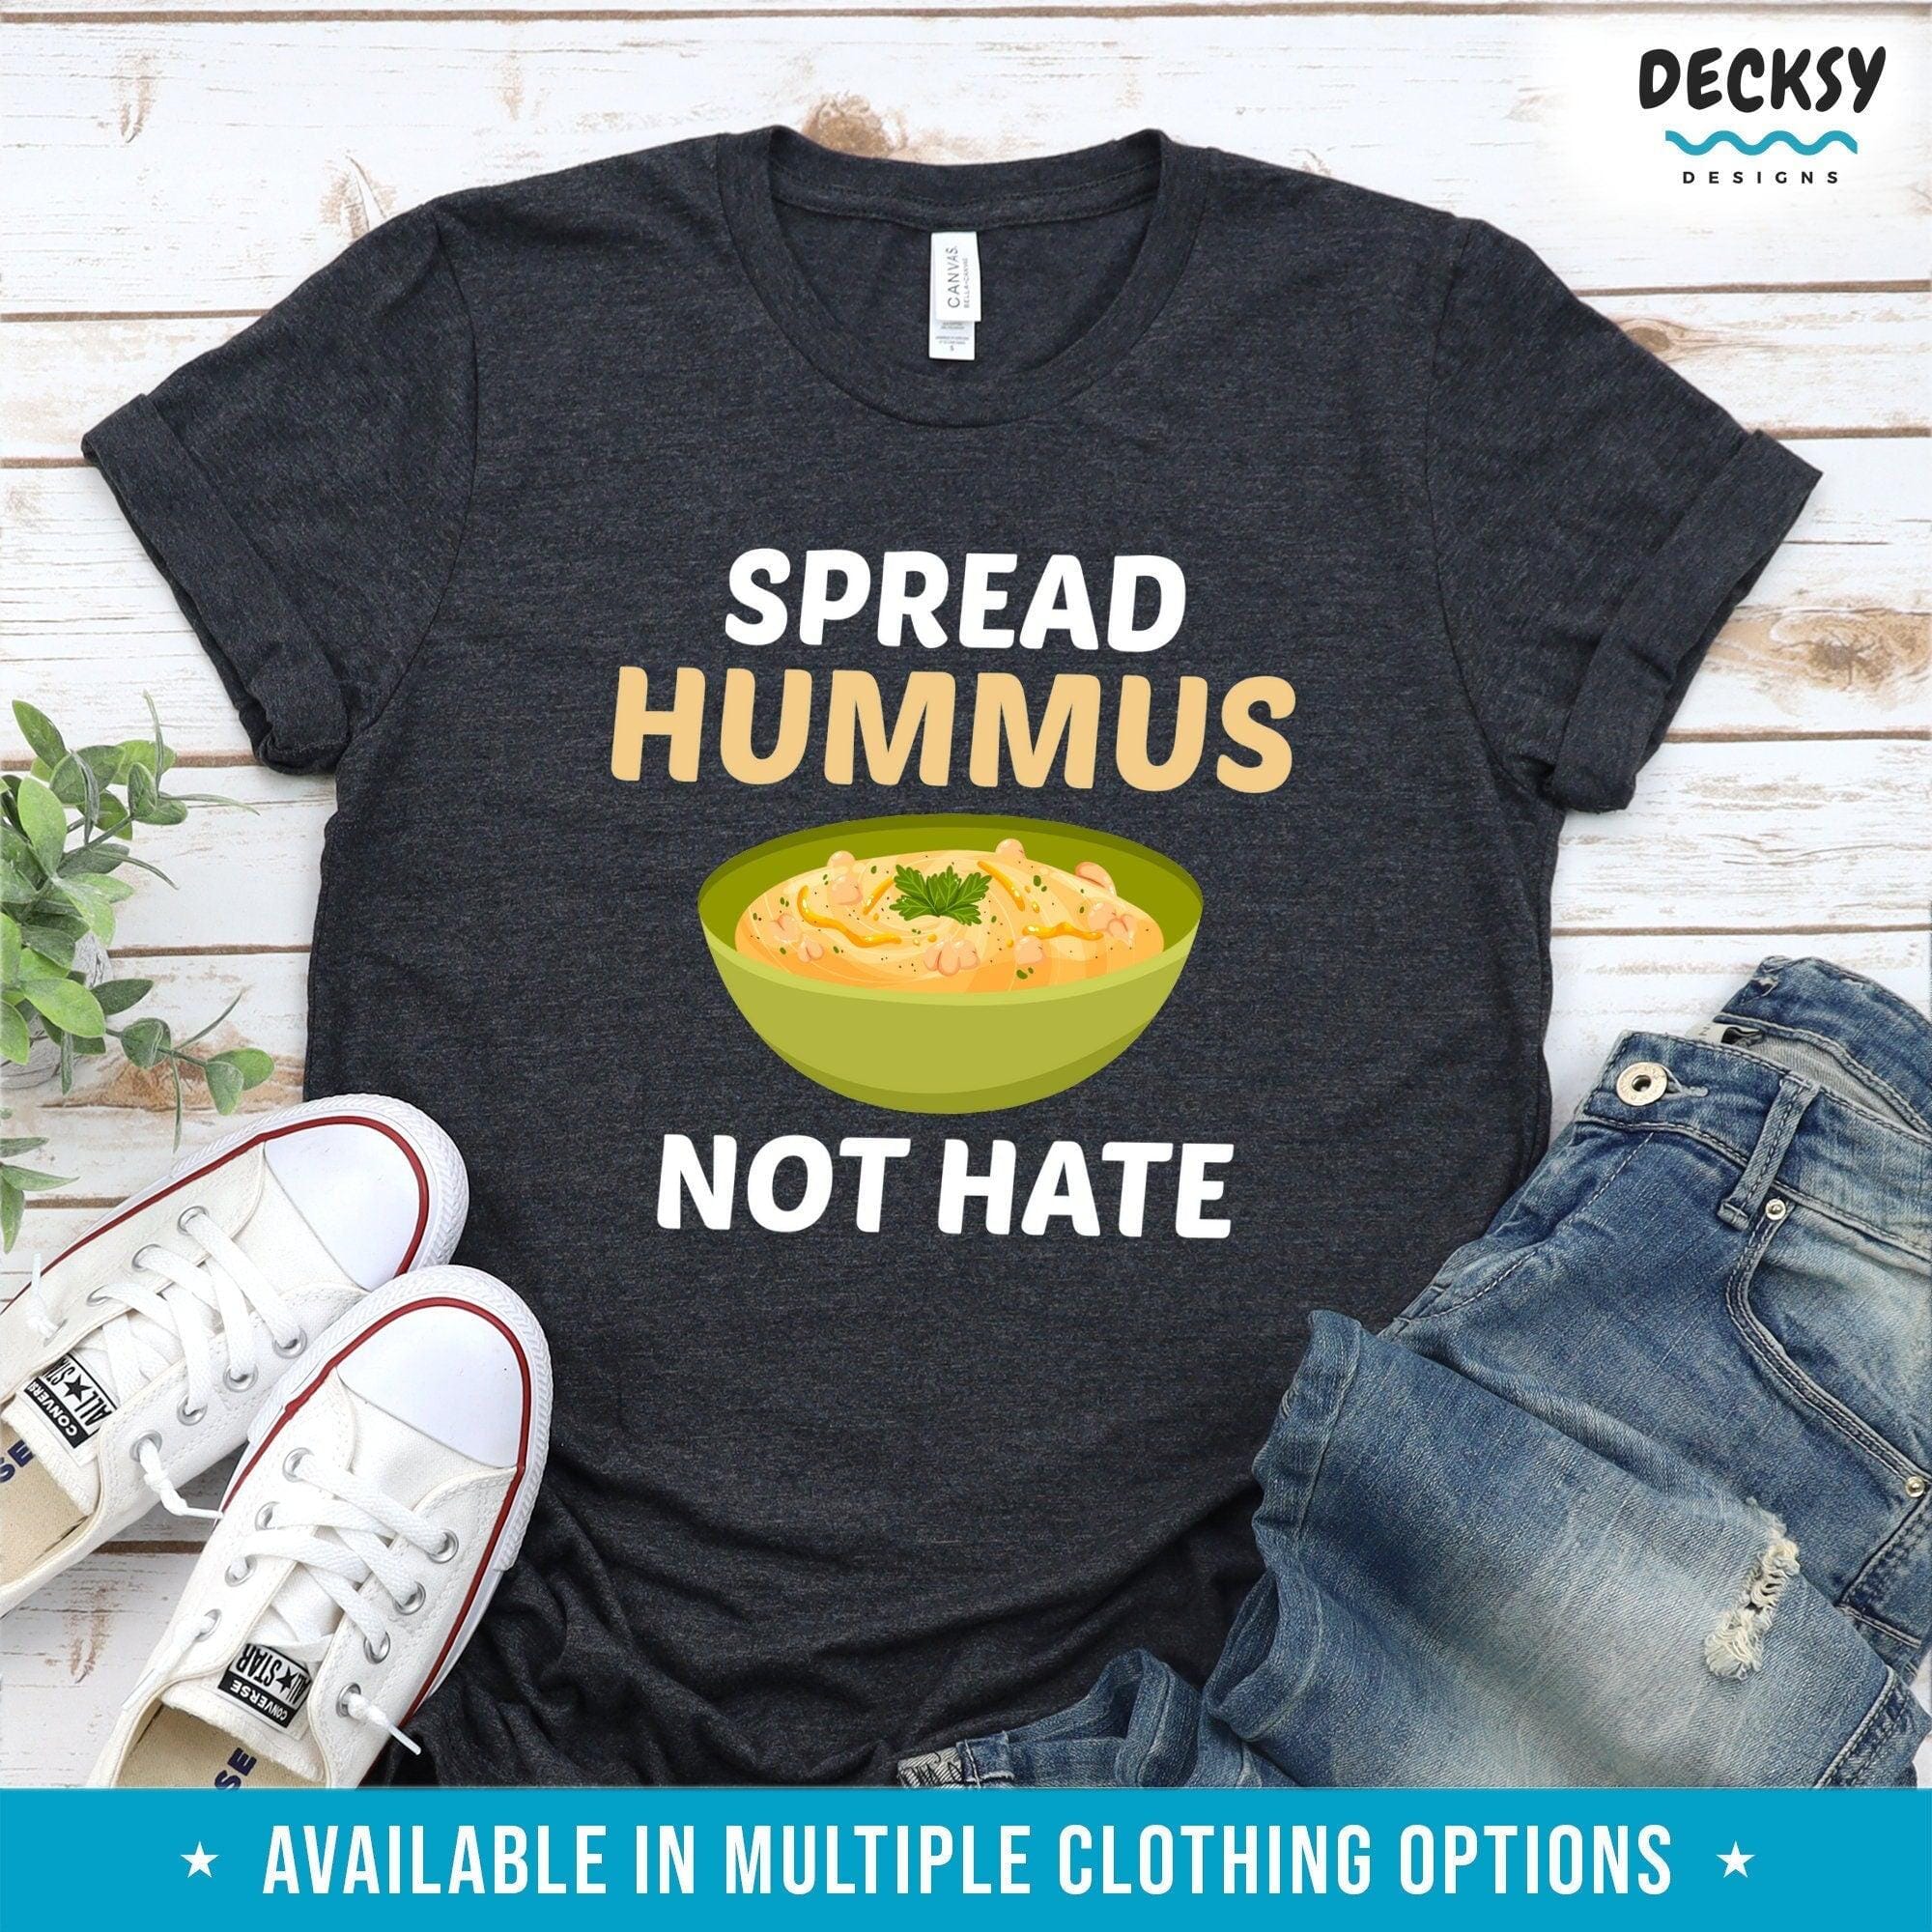 Hummus Shirt, Lebanese Food Lover Gift-Clothing:Gender-Neutral Adult Clothing:Tops & Tees:T-shirts:Graphic Tees-DecksyDesigns